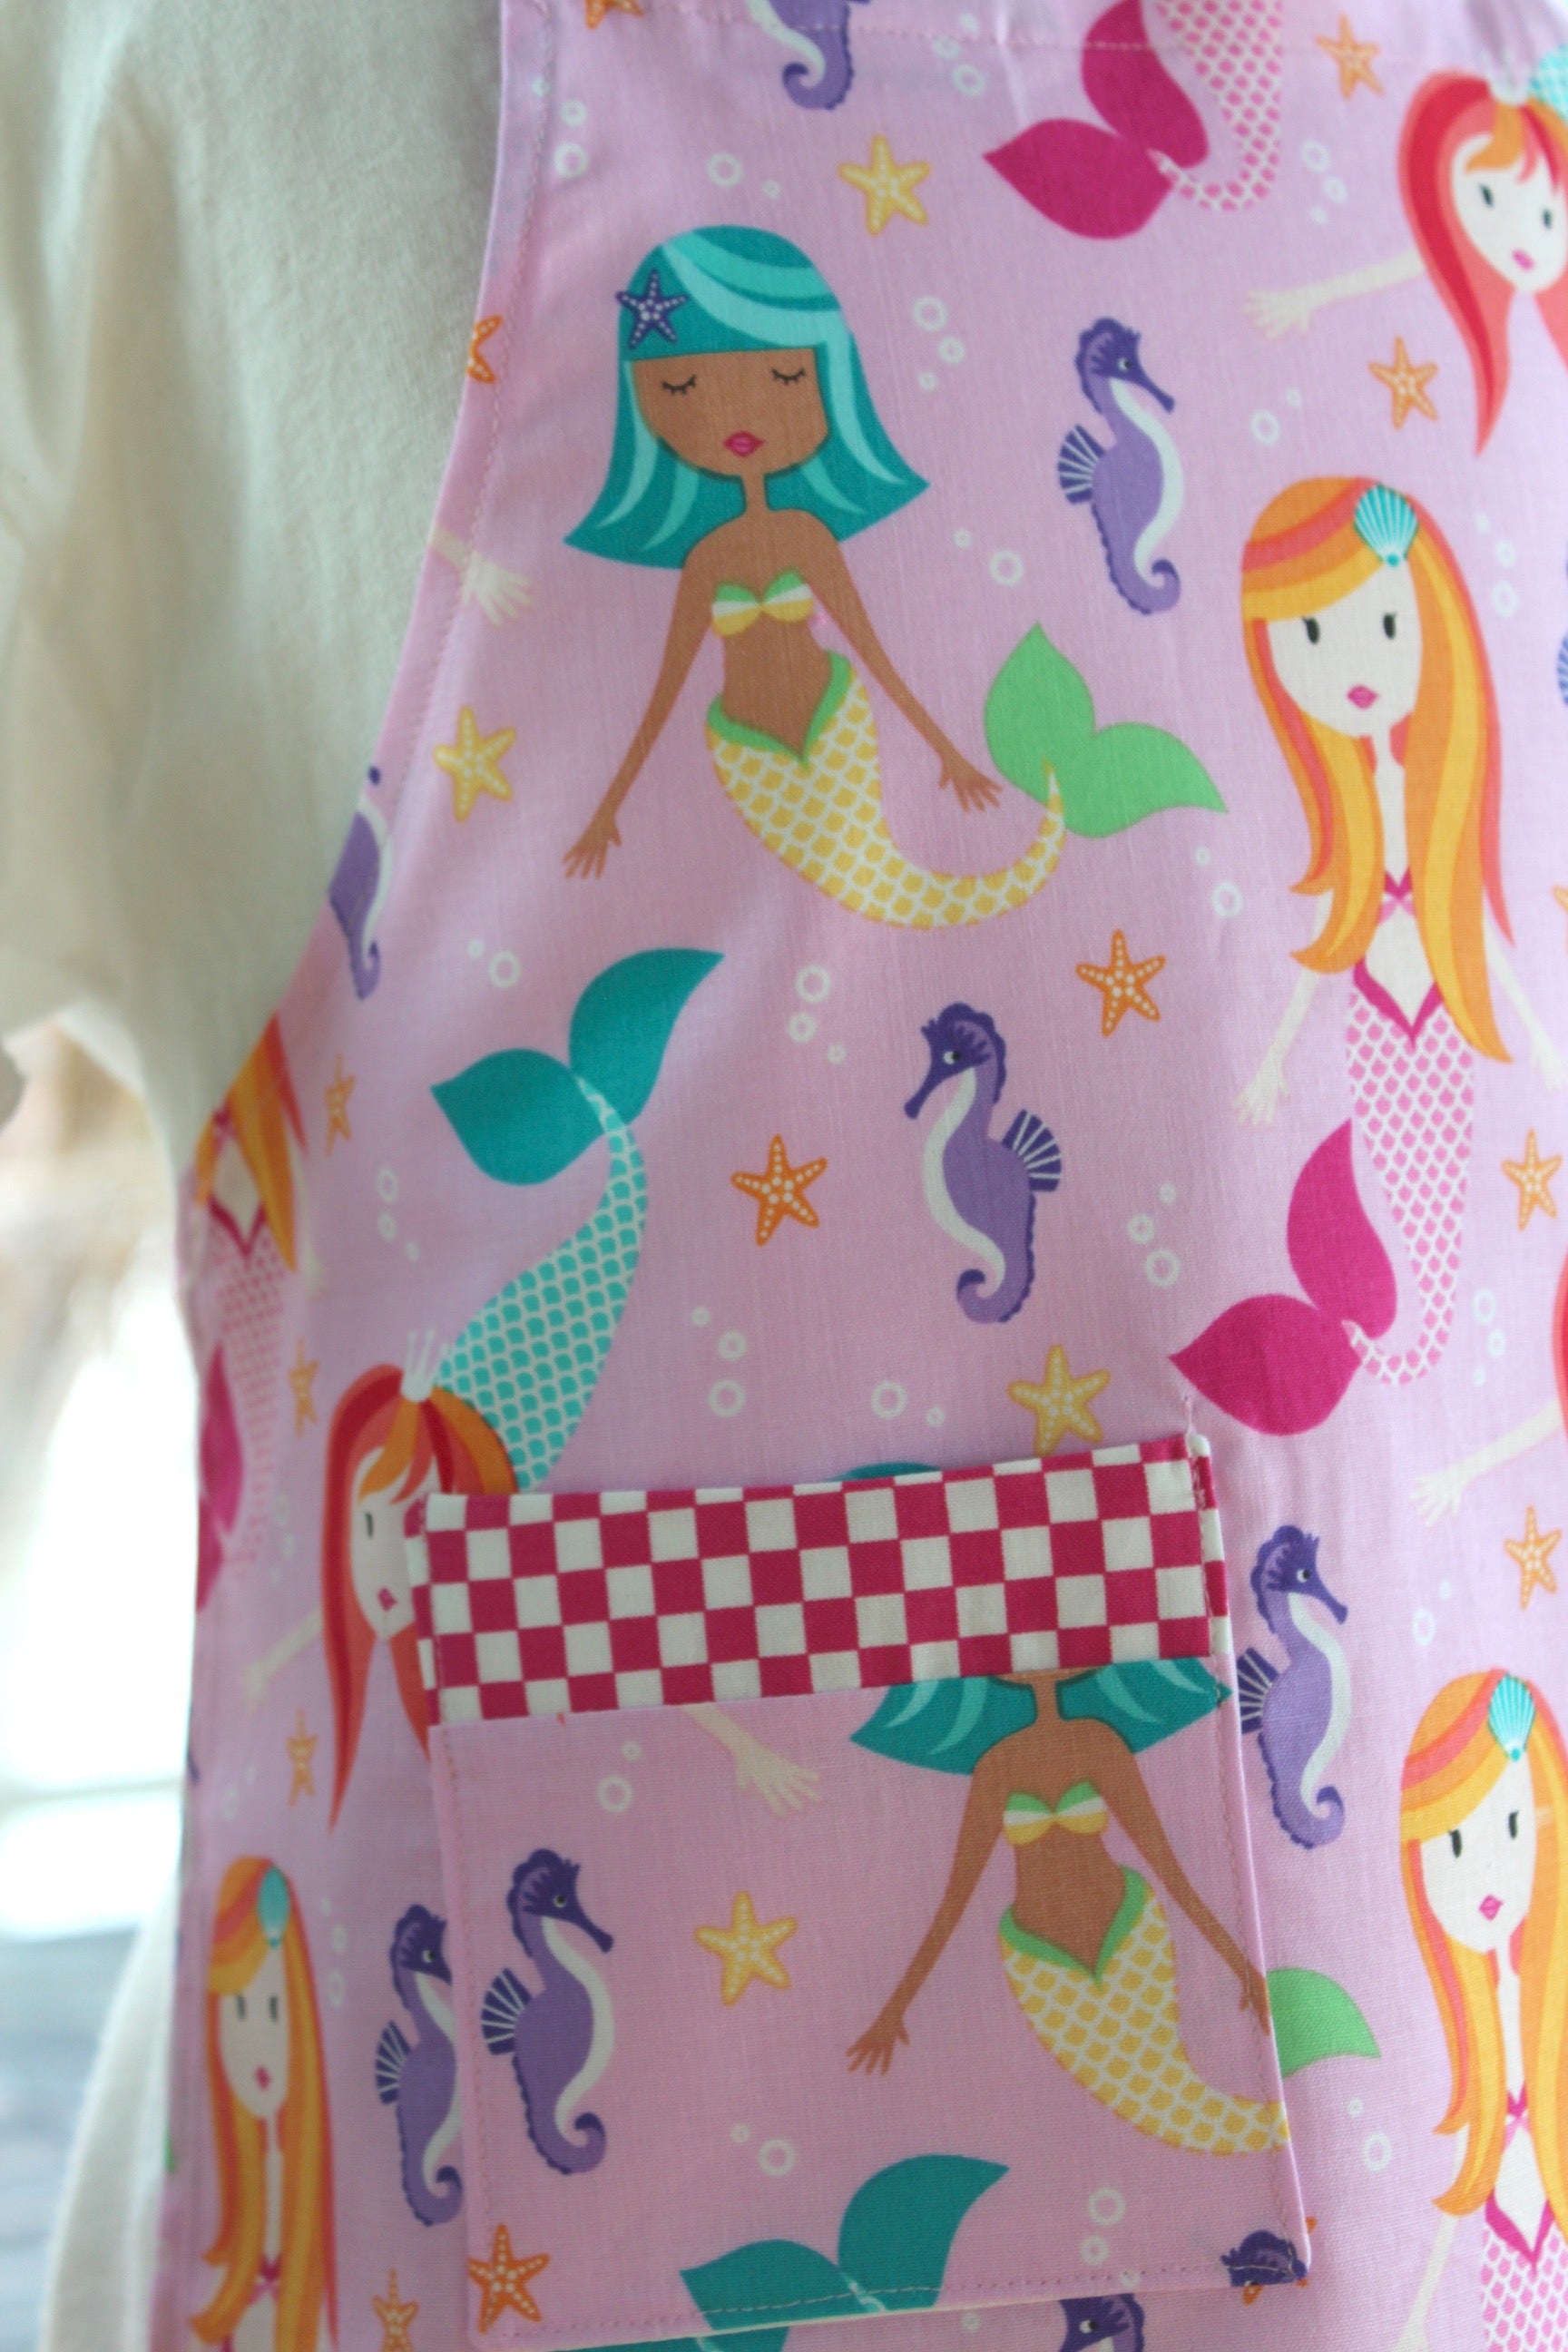 Mermaid Play Kid's Apron-The Blue Peony-Age Group_Kids,Animal_Mermaid,Category_Apron,Color_Pink,Department_Kitchen,Gender_Girls,Material_Cotton,Size_Medium (ages 6-11),Size_Small (ages up to 5),Theme_Water Life